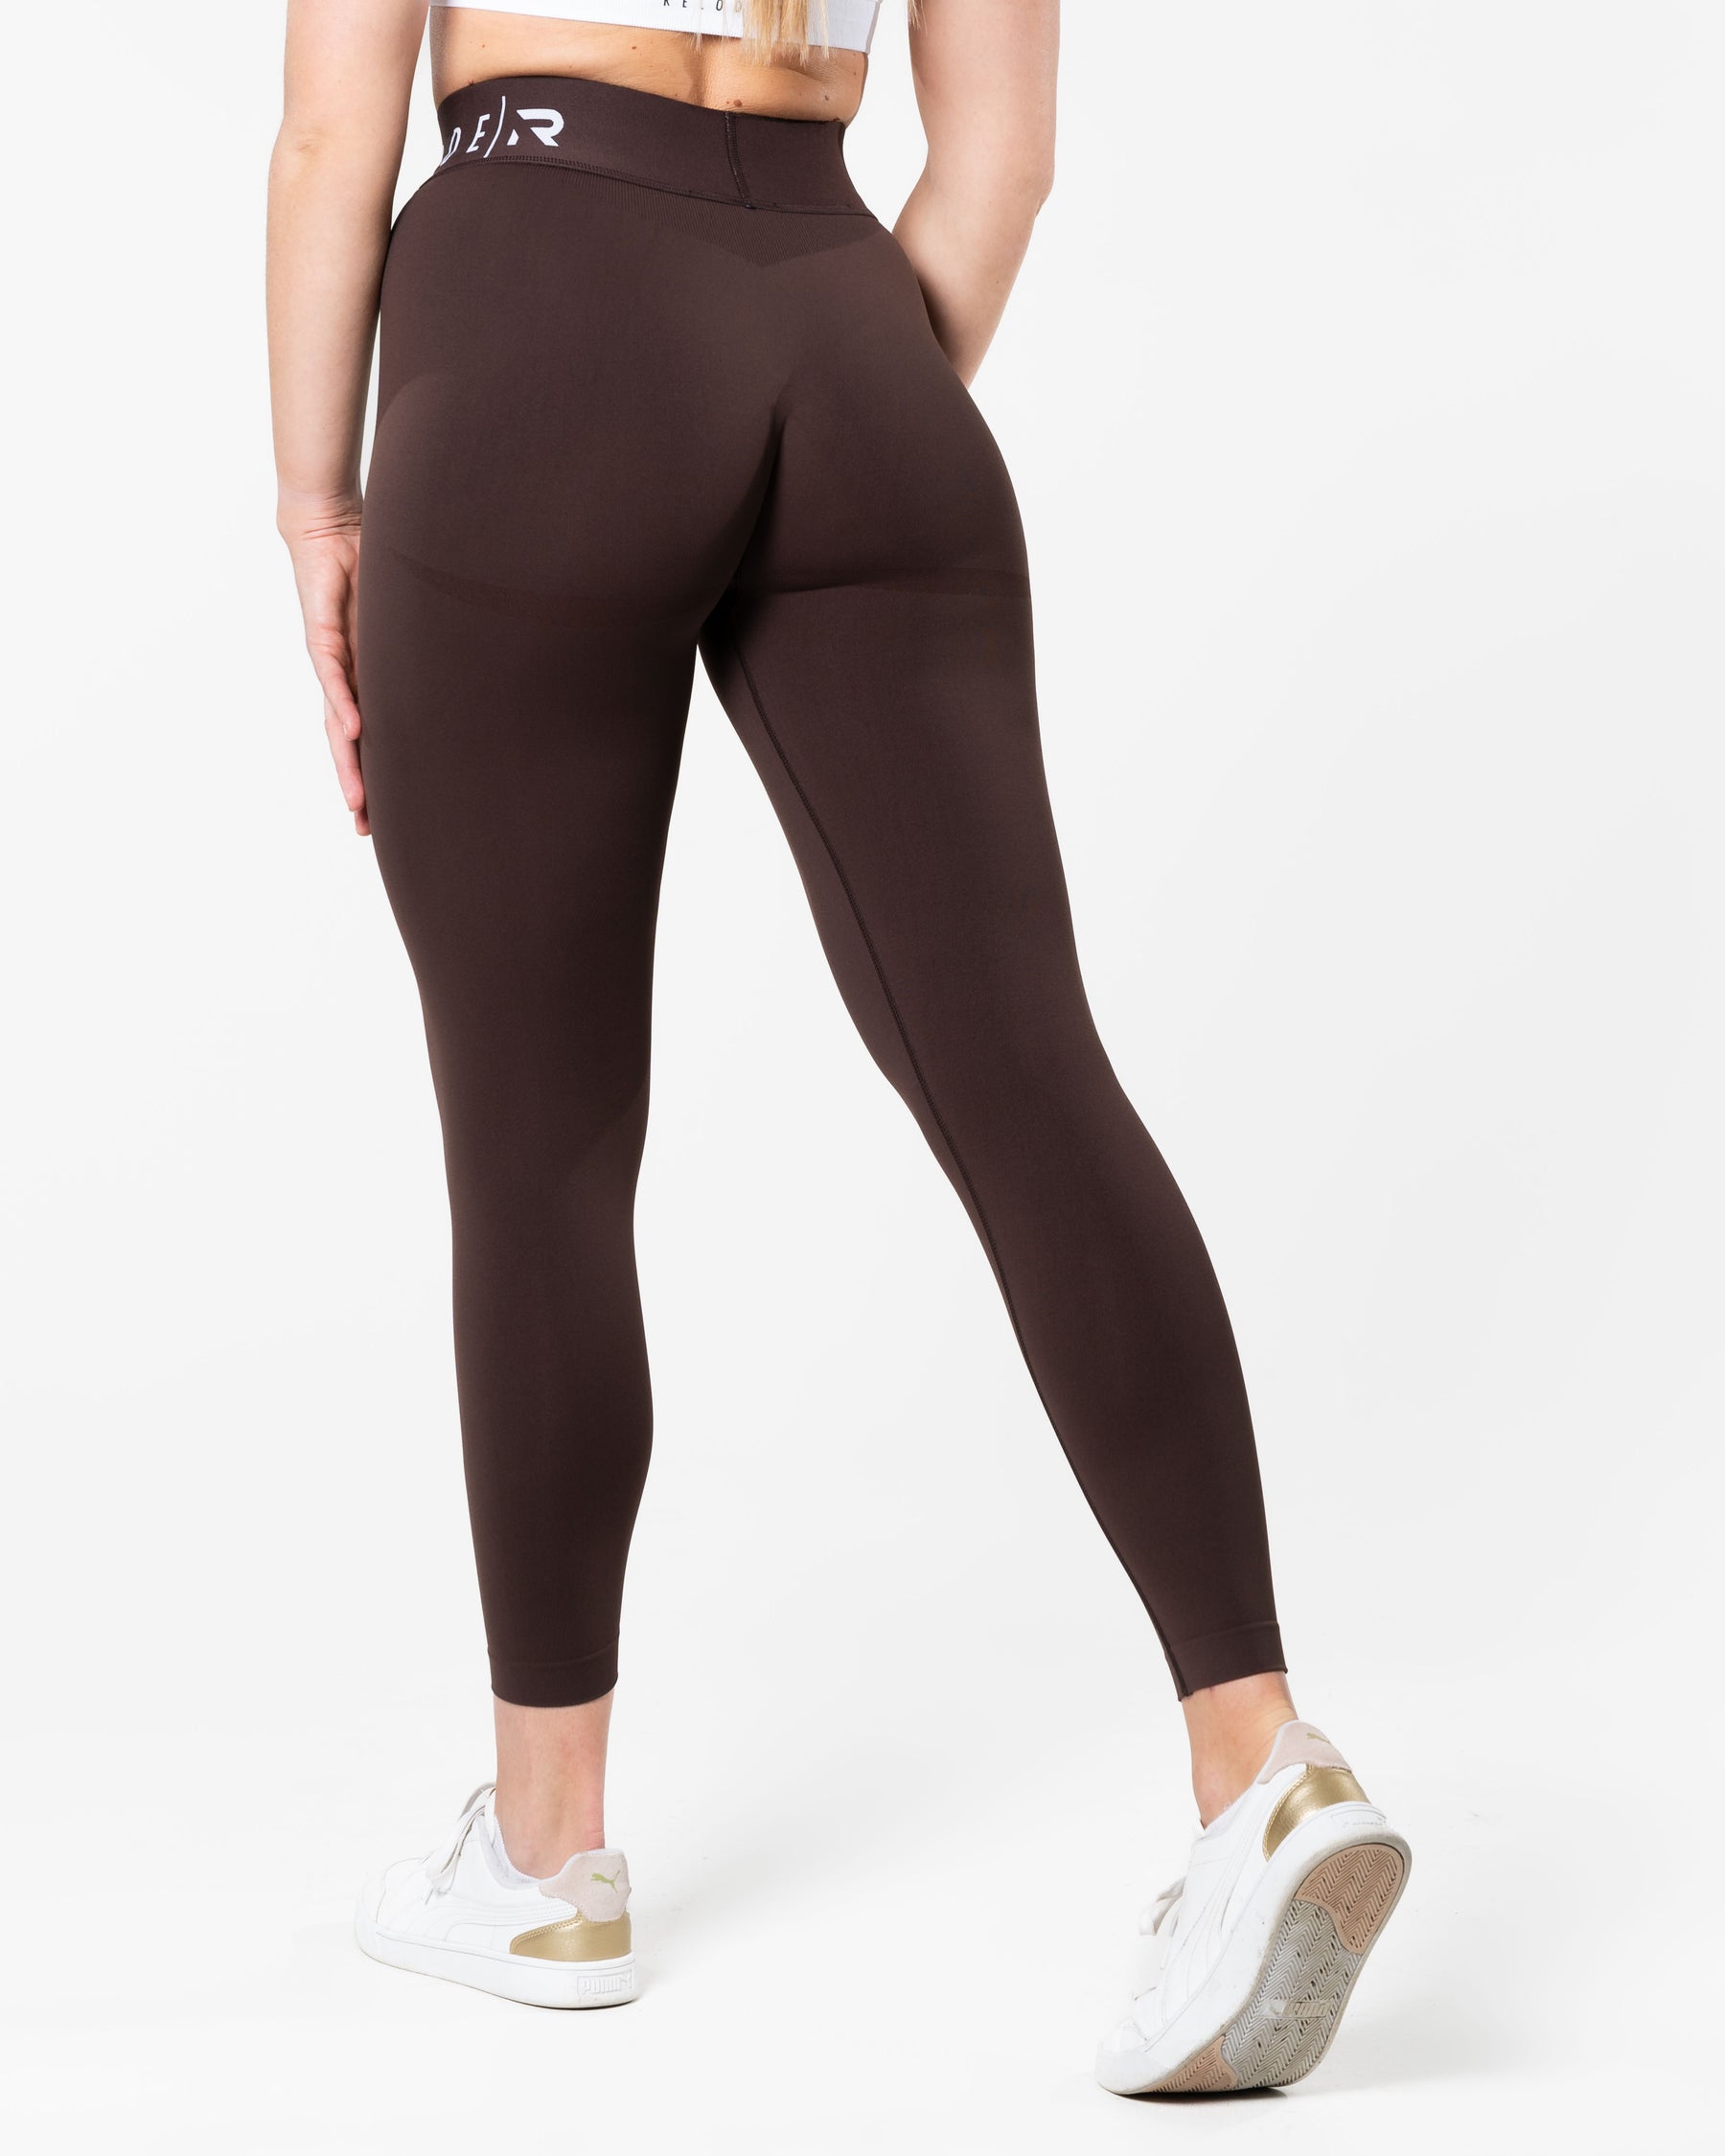 Apex Seamless Tights - Brown - RELODE